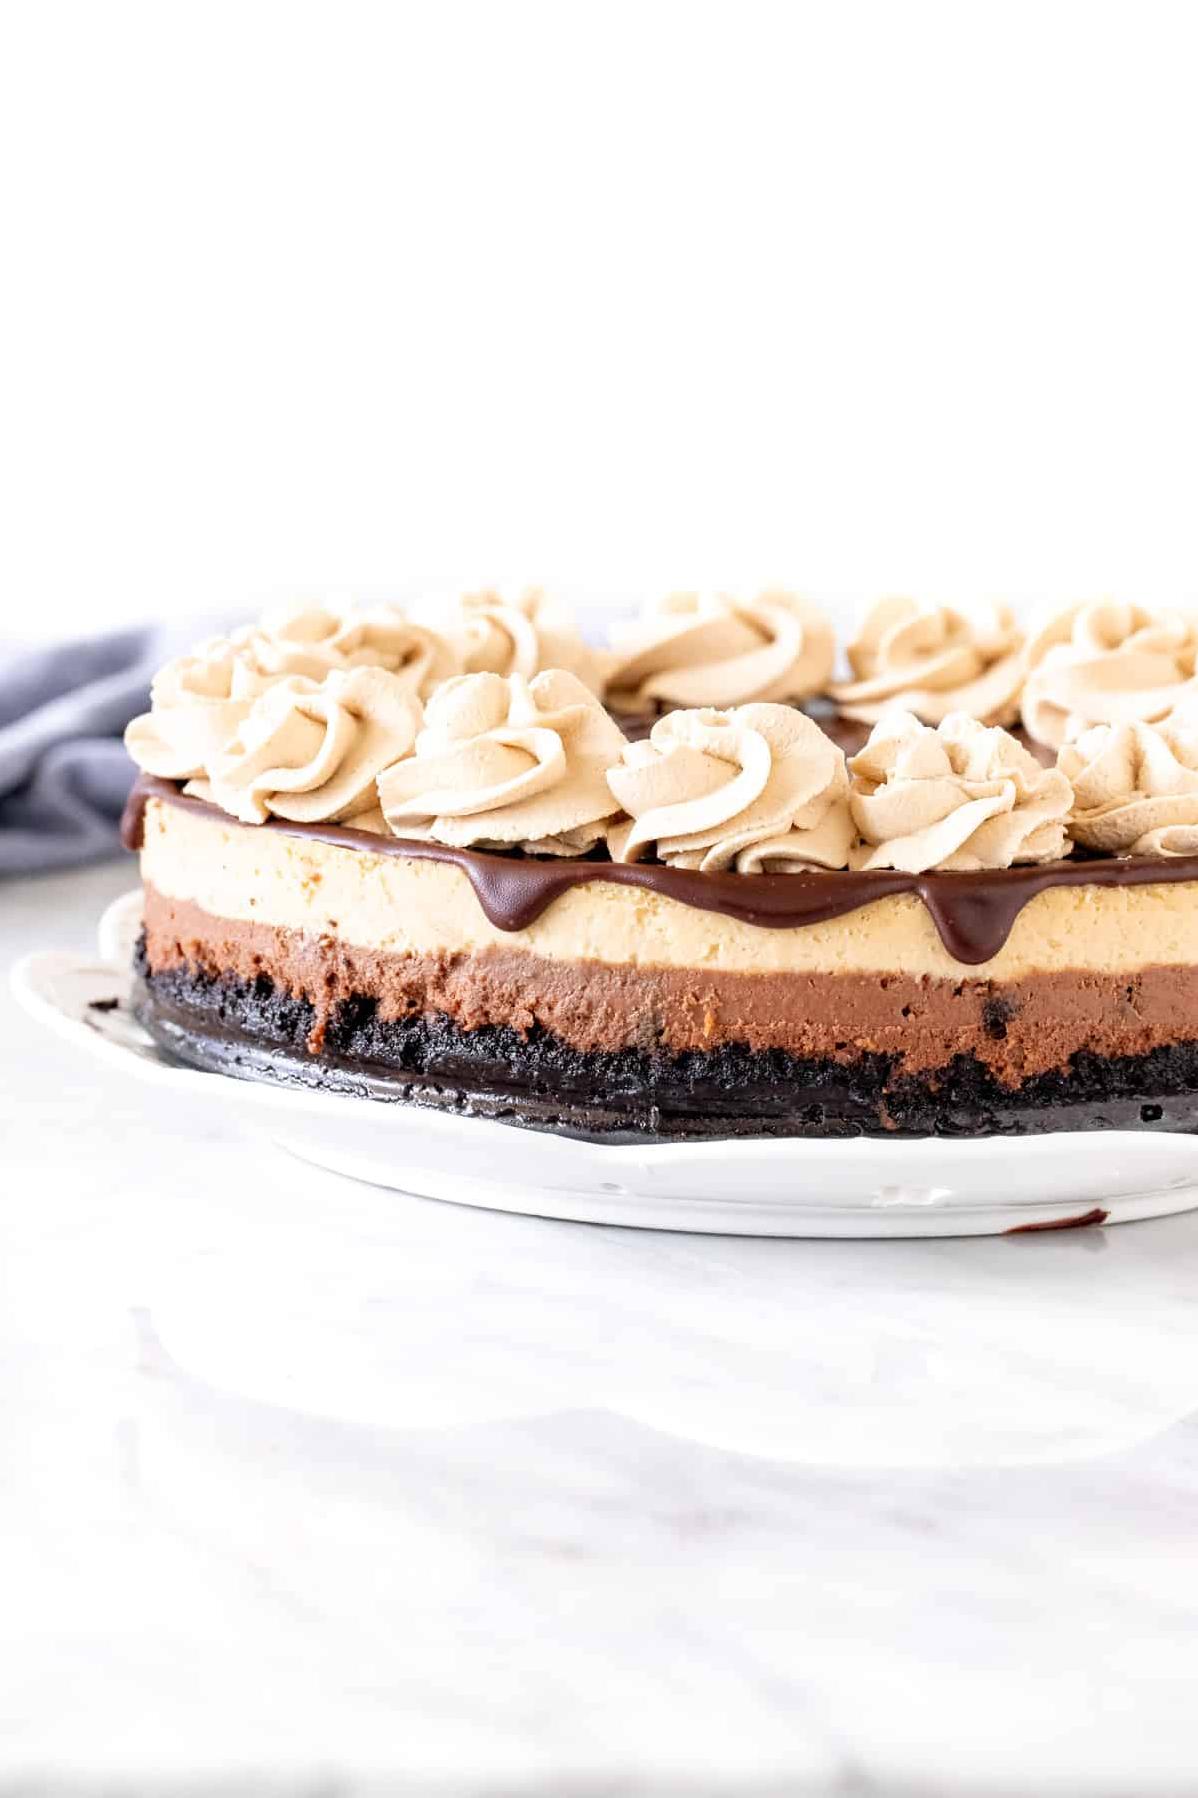  Sink your teeth into a luscious chocolate-coffee filling and rich chocolate crust.